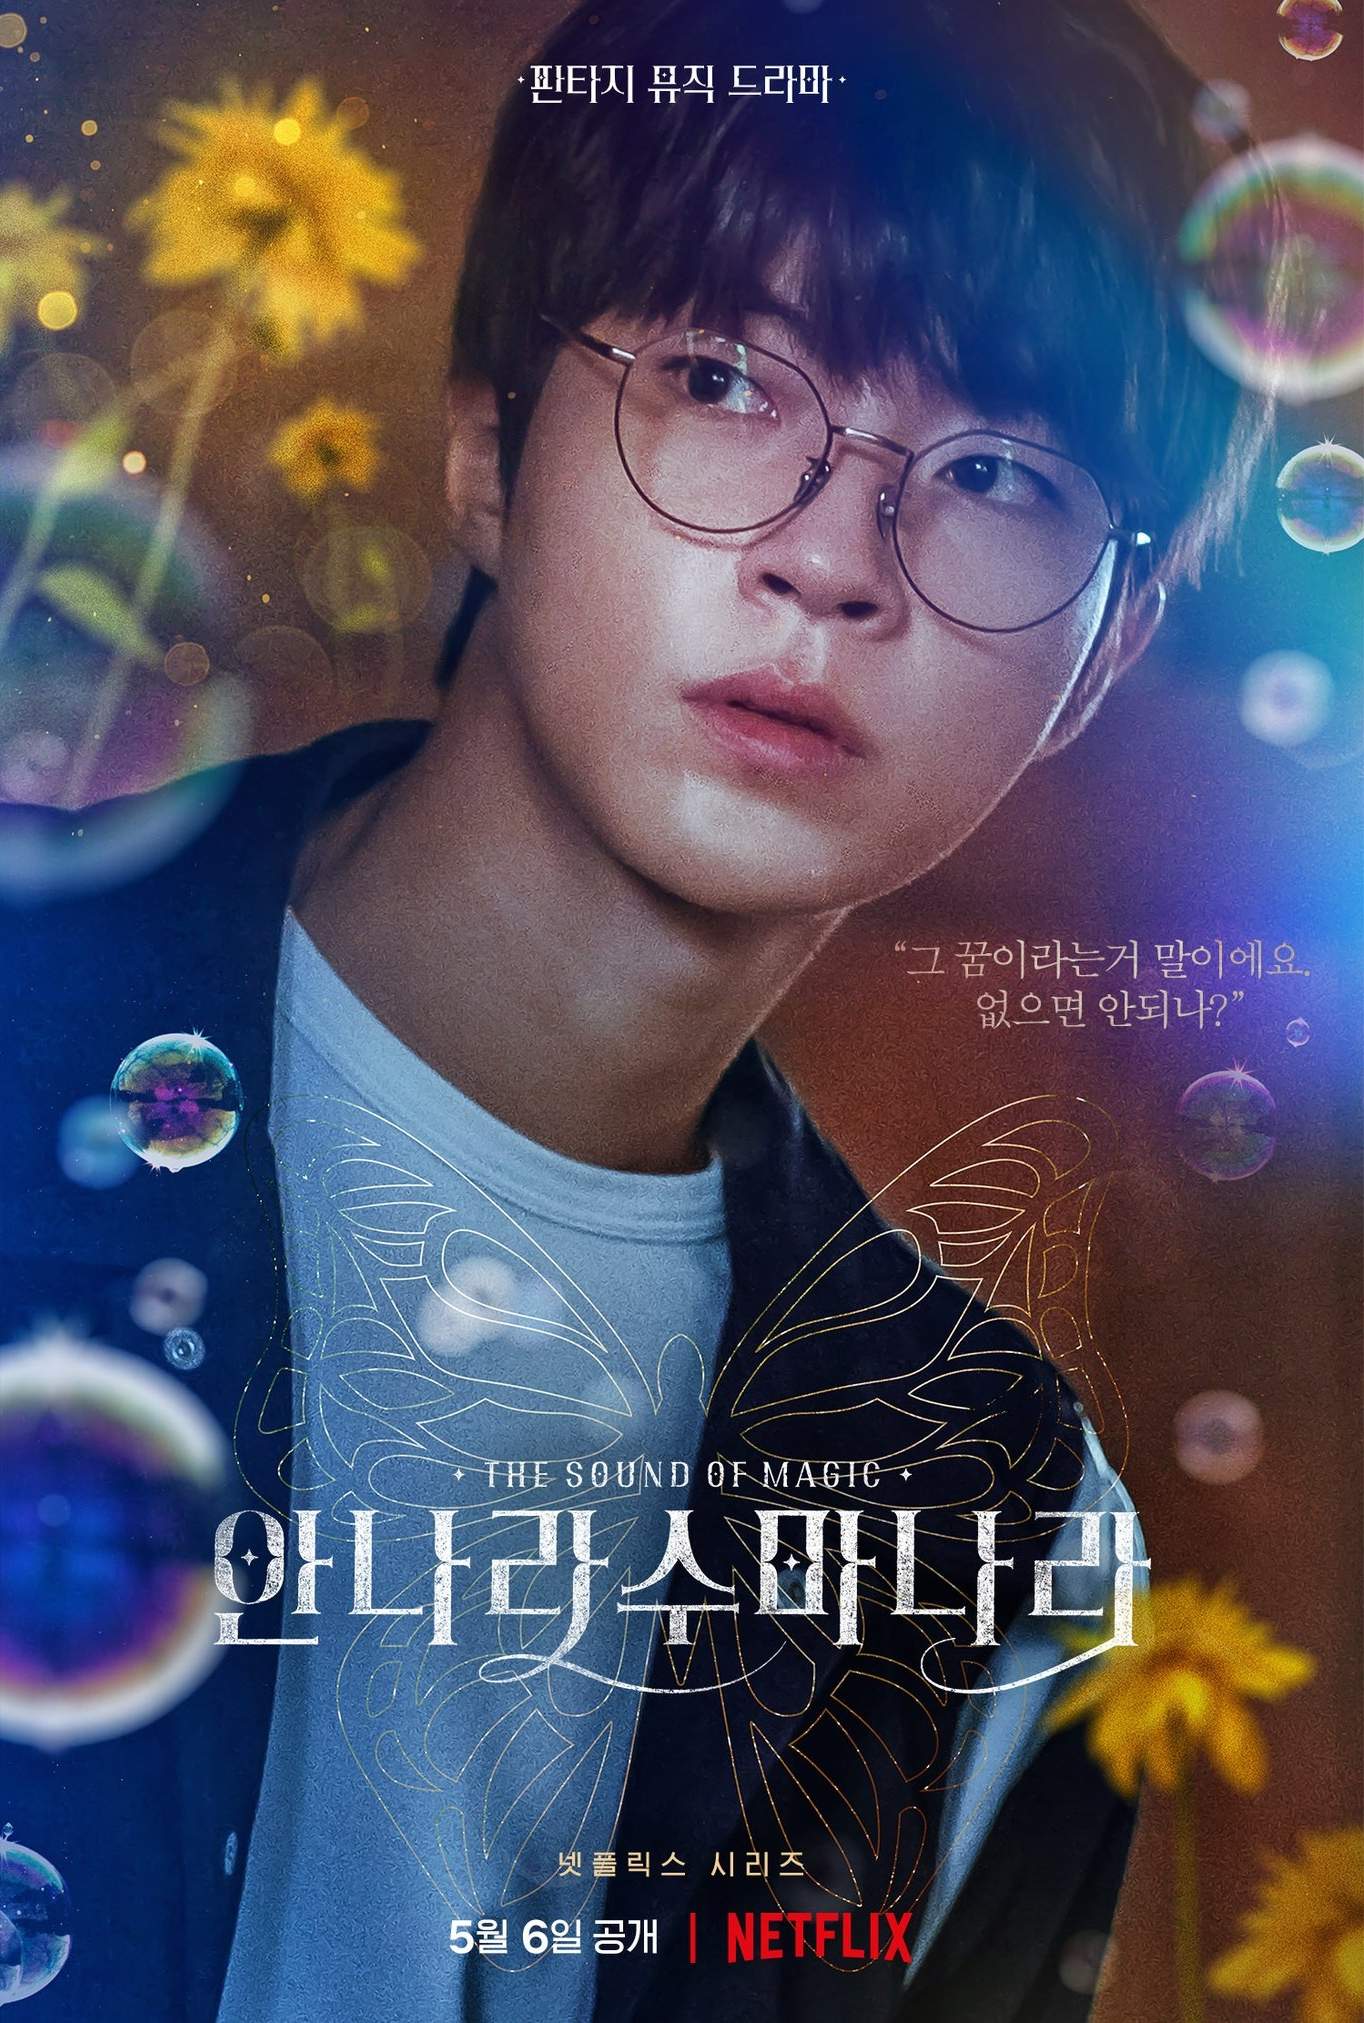 Hwang In-yeop - The sound of magic - Netflix poster